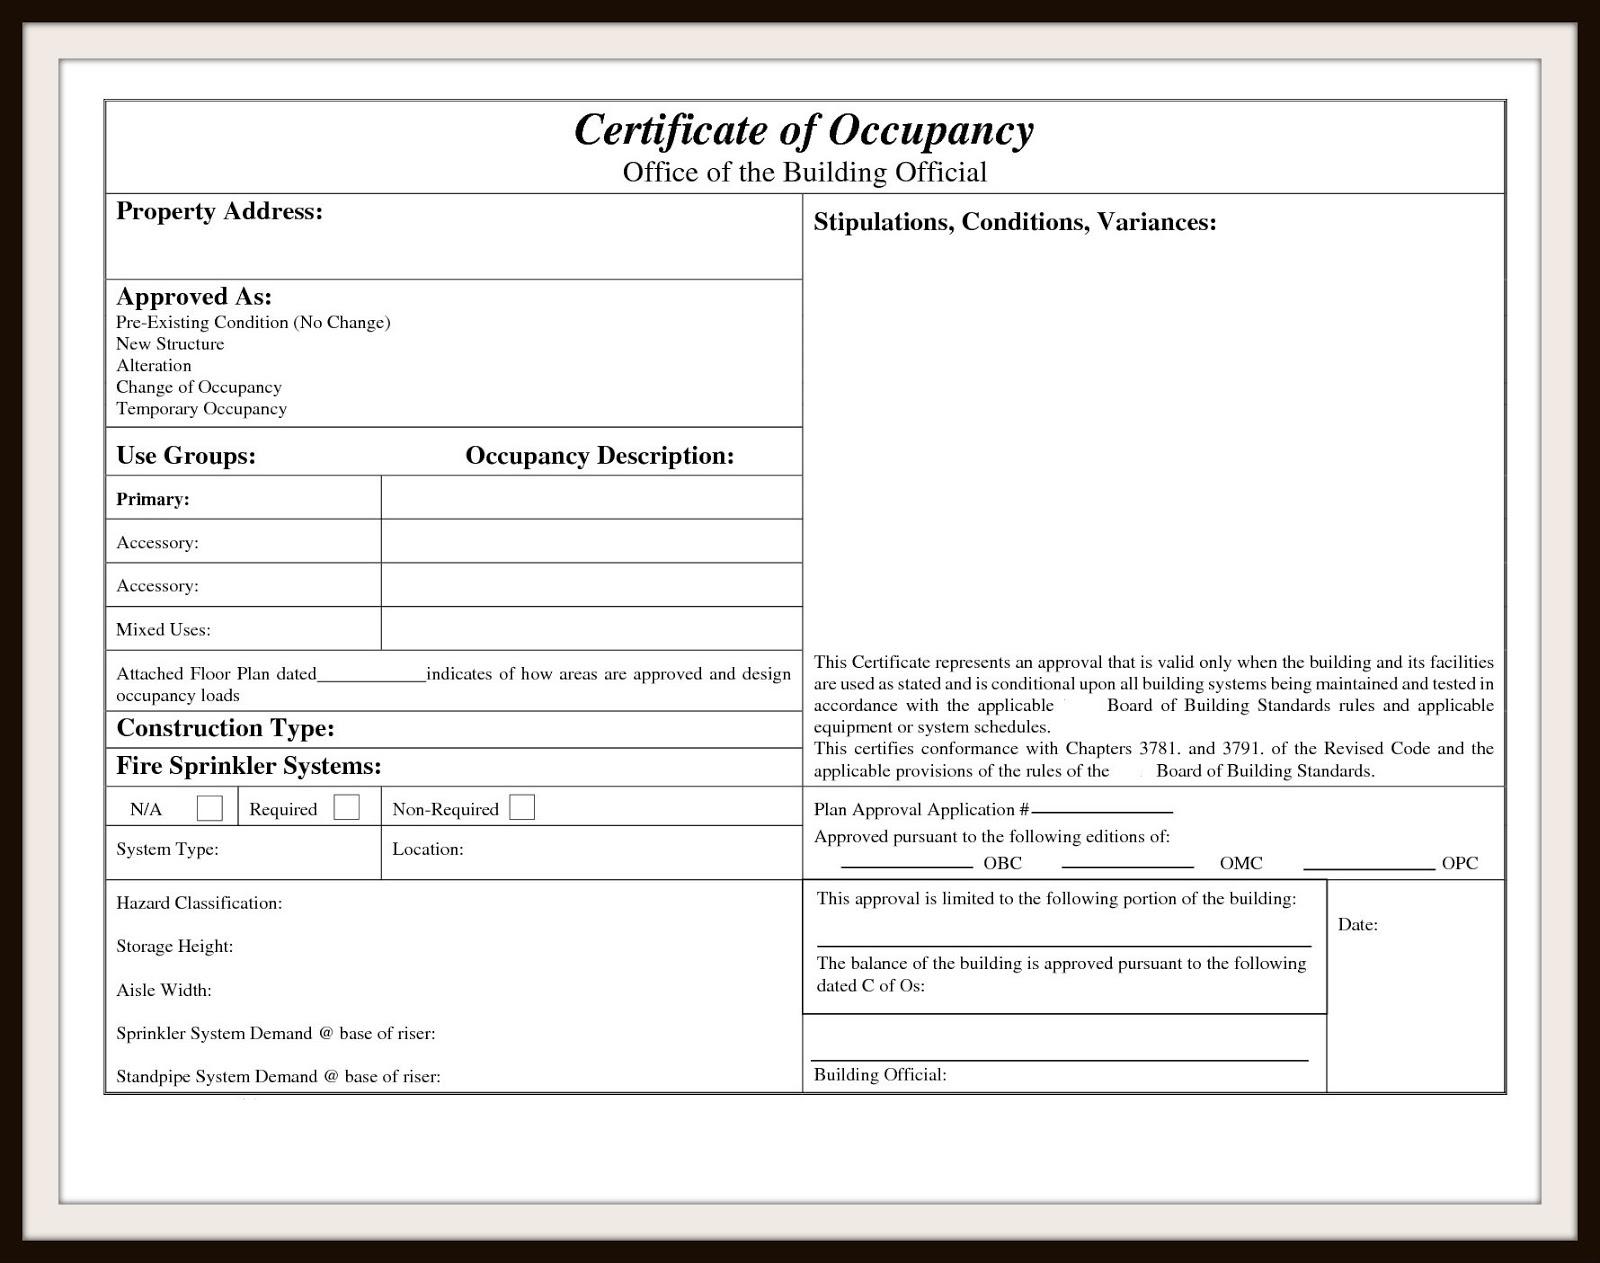 What is Certificate of Occupancy